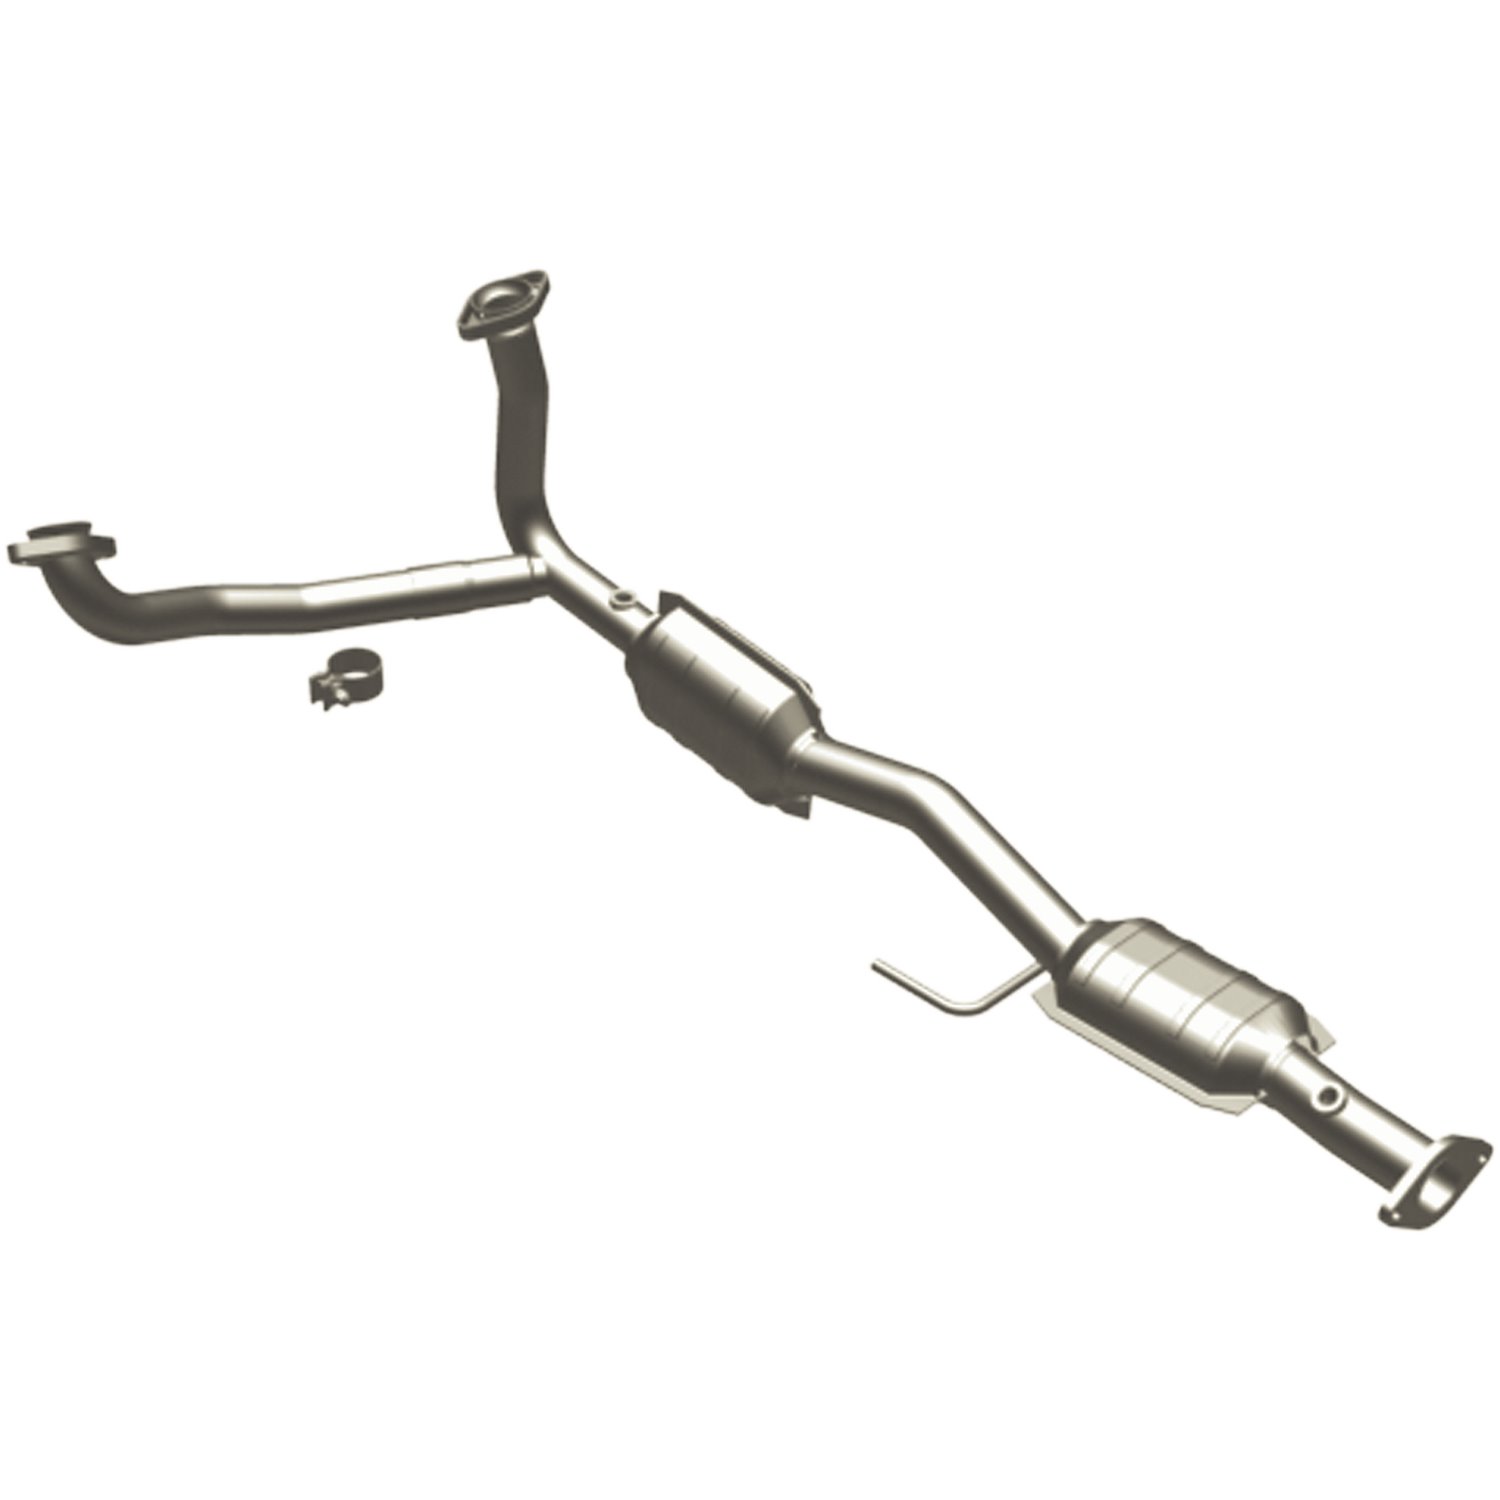 1990-1995 Ford Aerostar California Grade CARB Compliant Direct-Fit Catalytic Converter